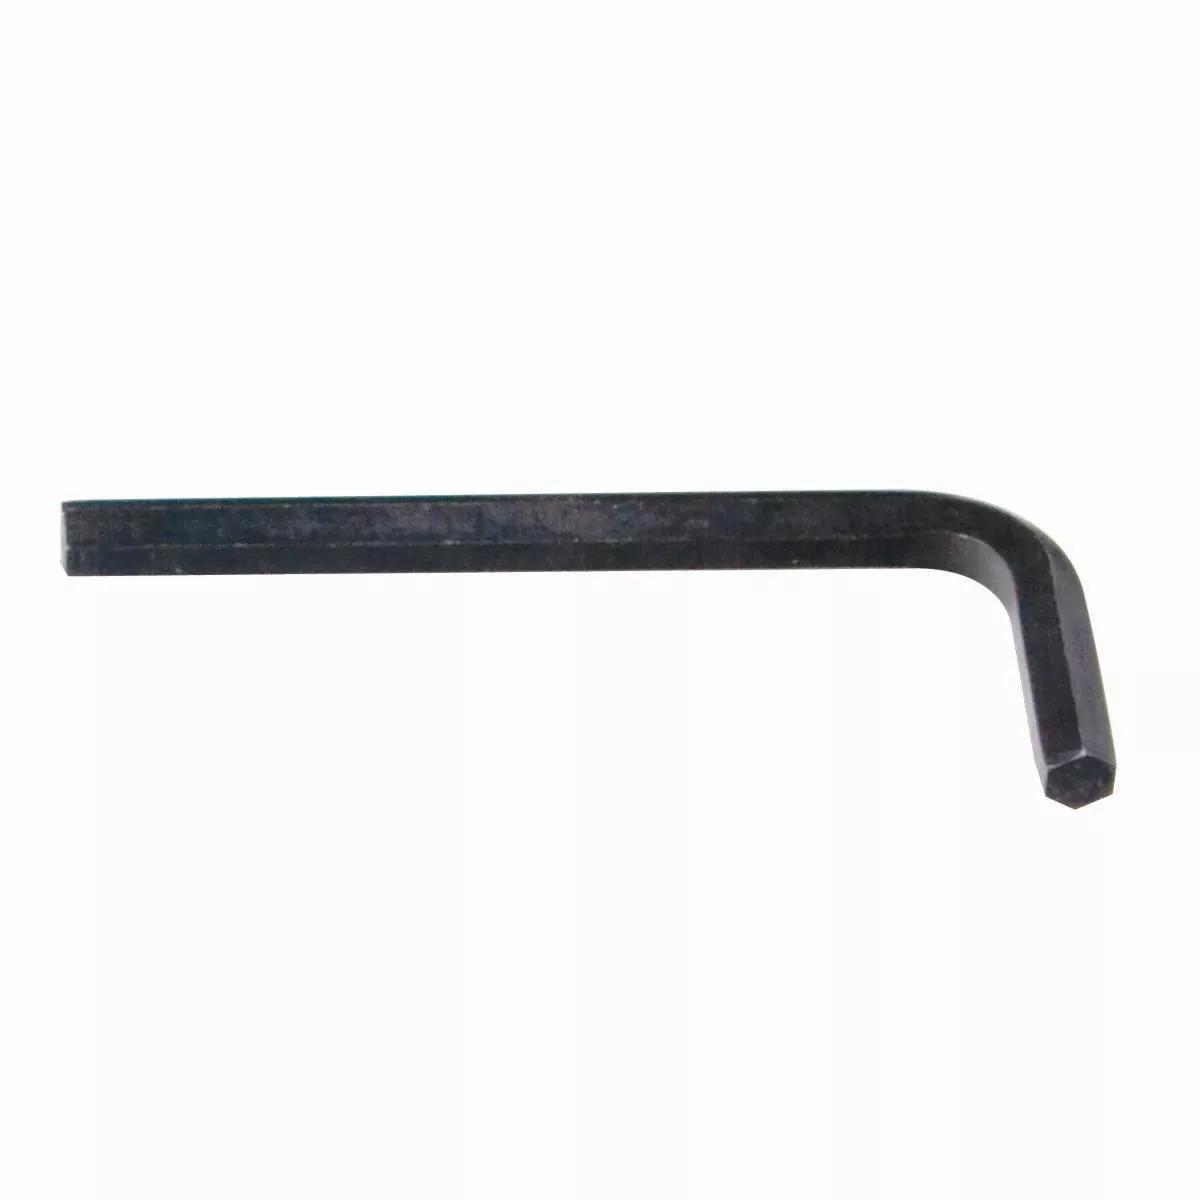 M12.0 Short Arm Hex Key Wrench